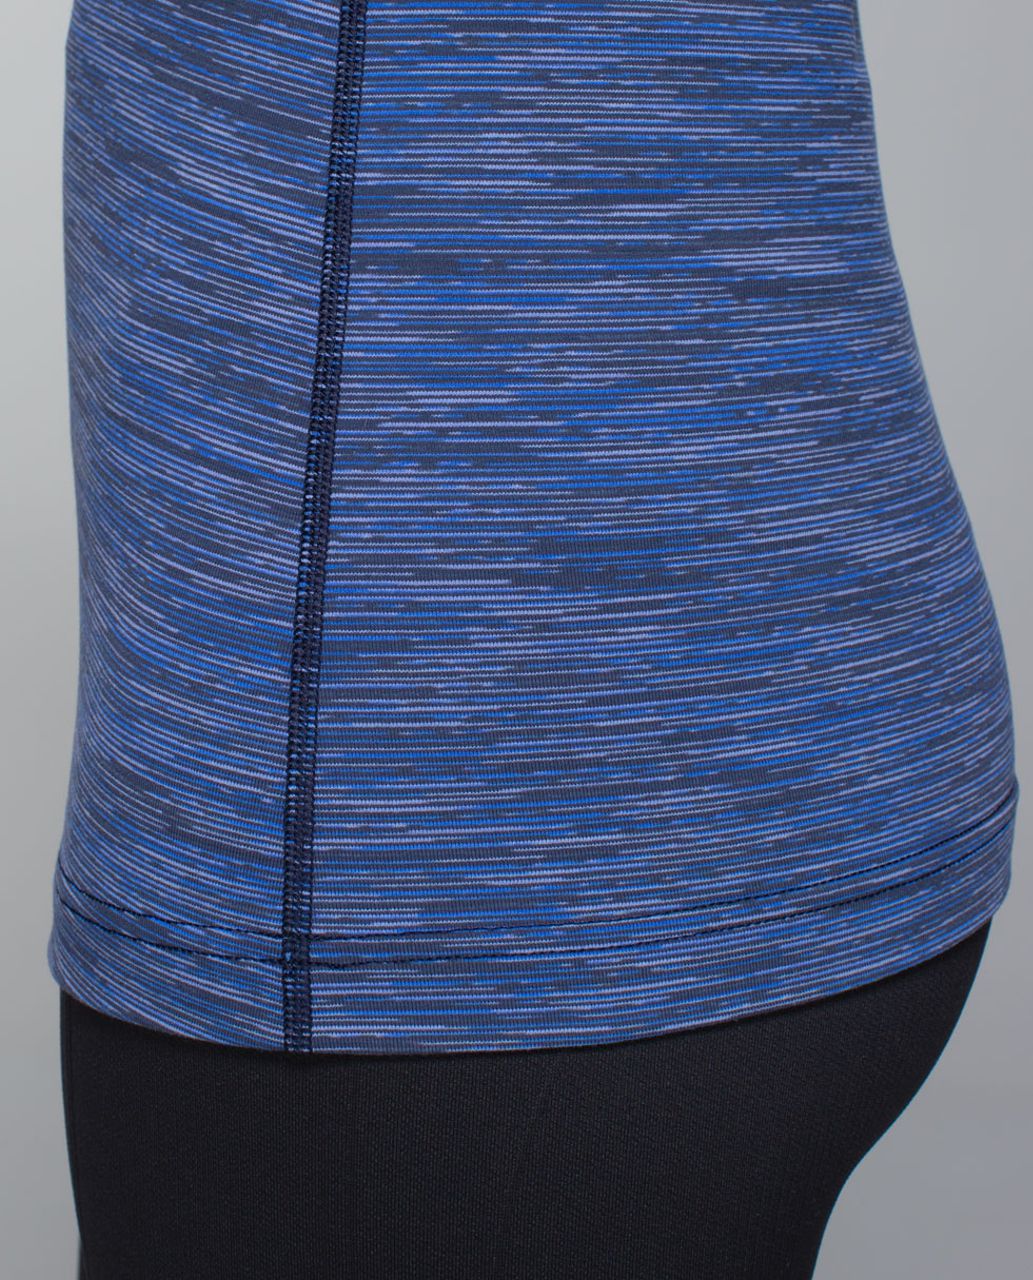 Lululemon Cool Racerback - Wee Are From Space Cadet Blue